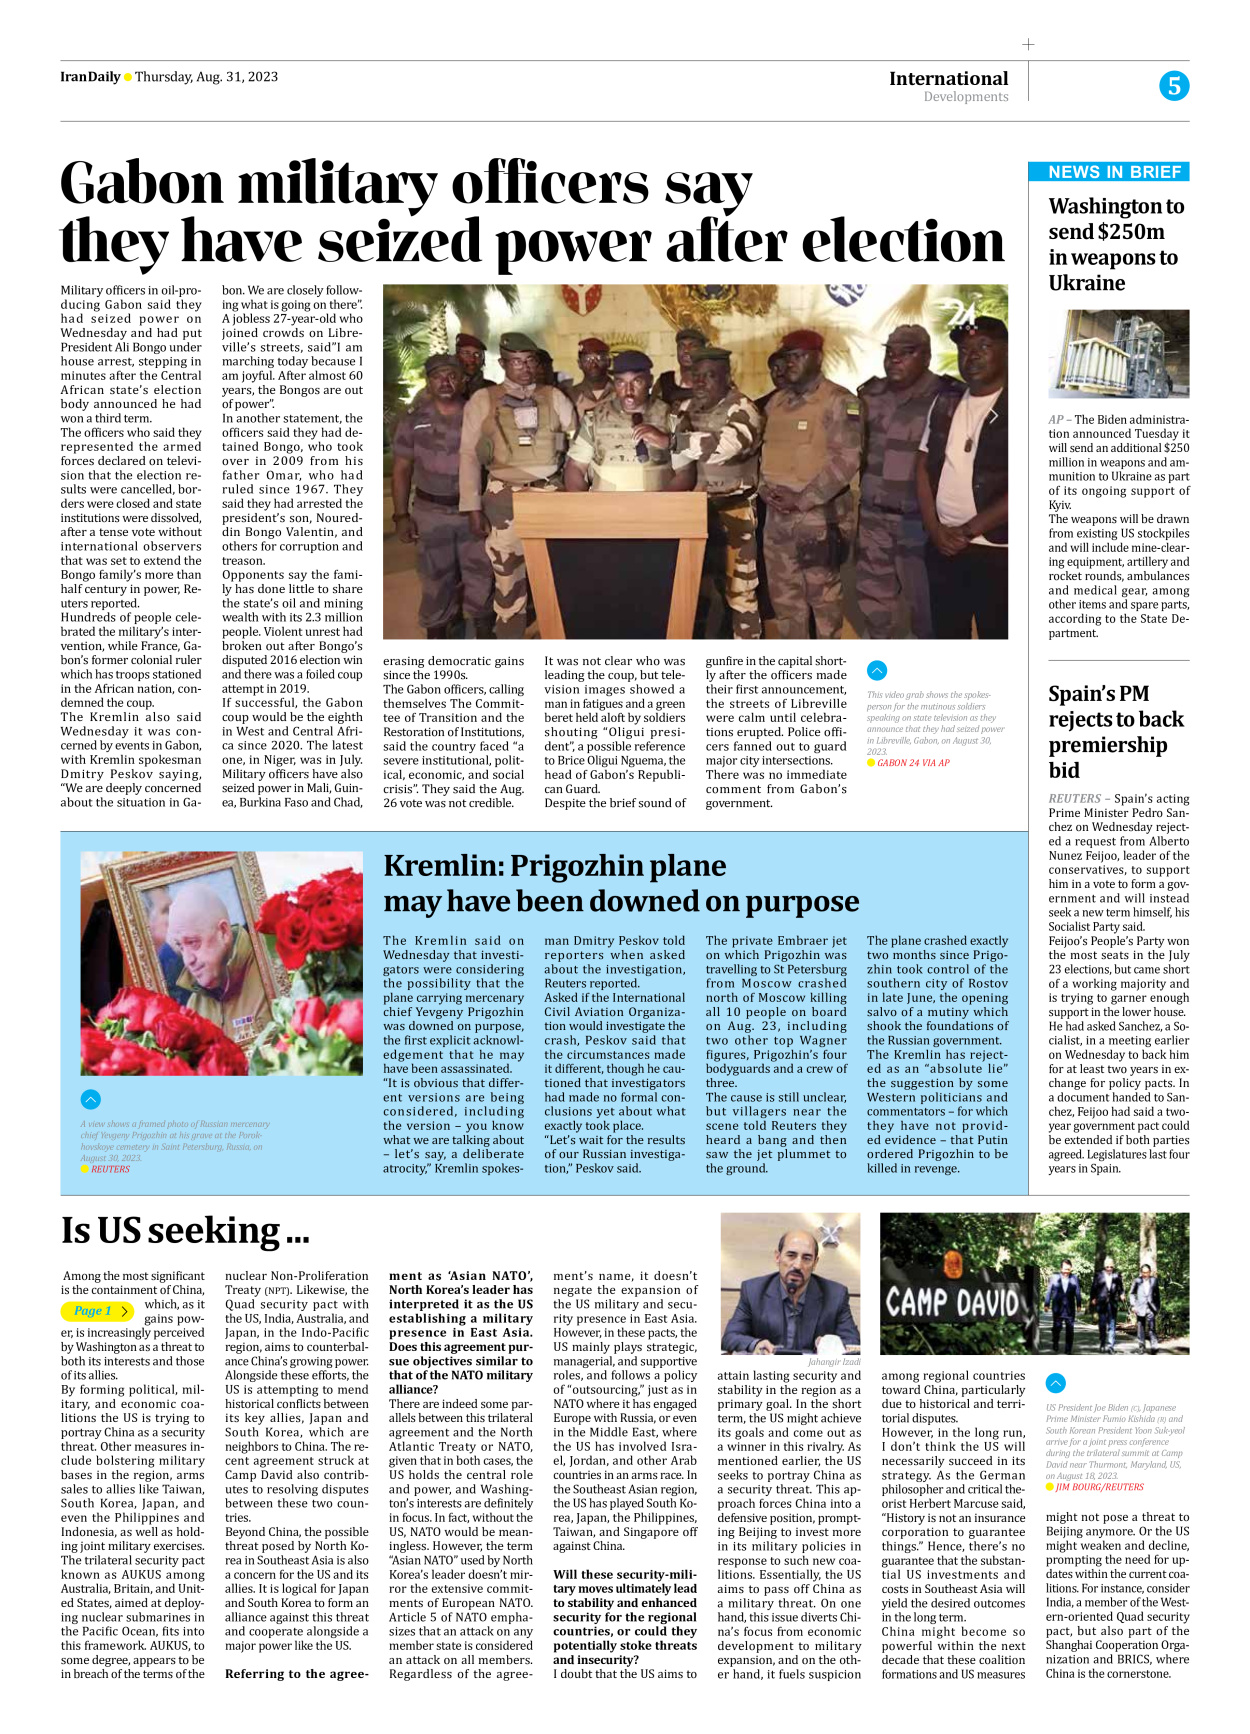 Iran Daily - Number Seven Thousand Three Hundred and Seventy Seven - 31 August 2023 - Page 5